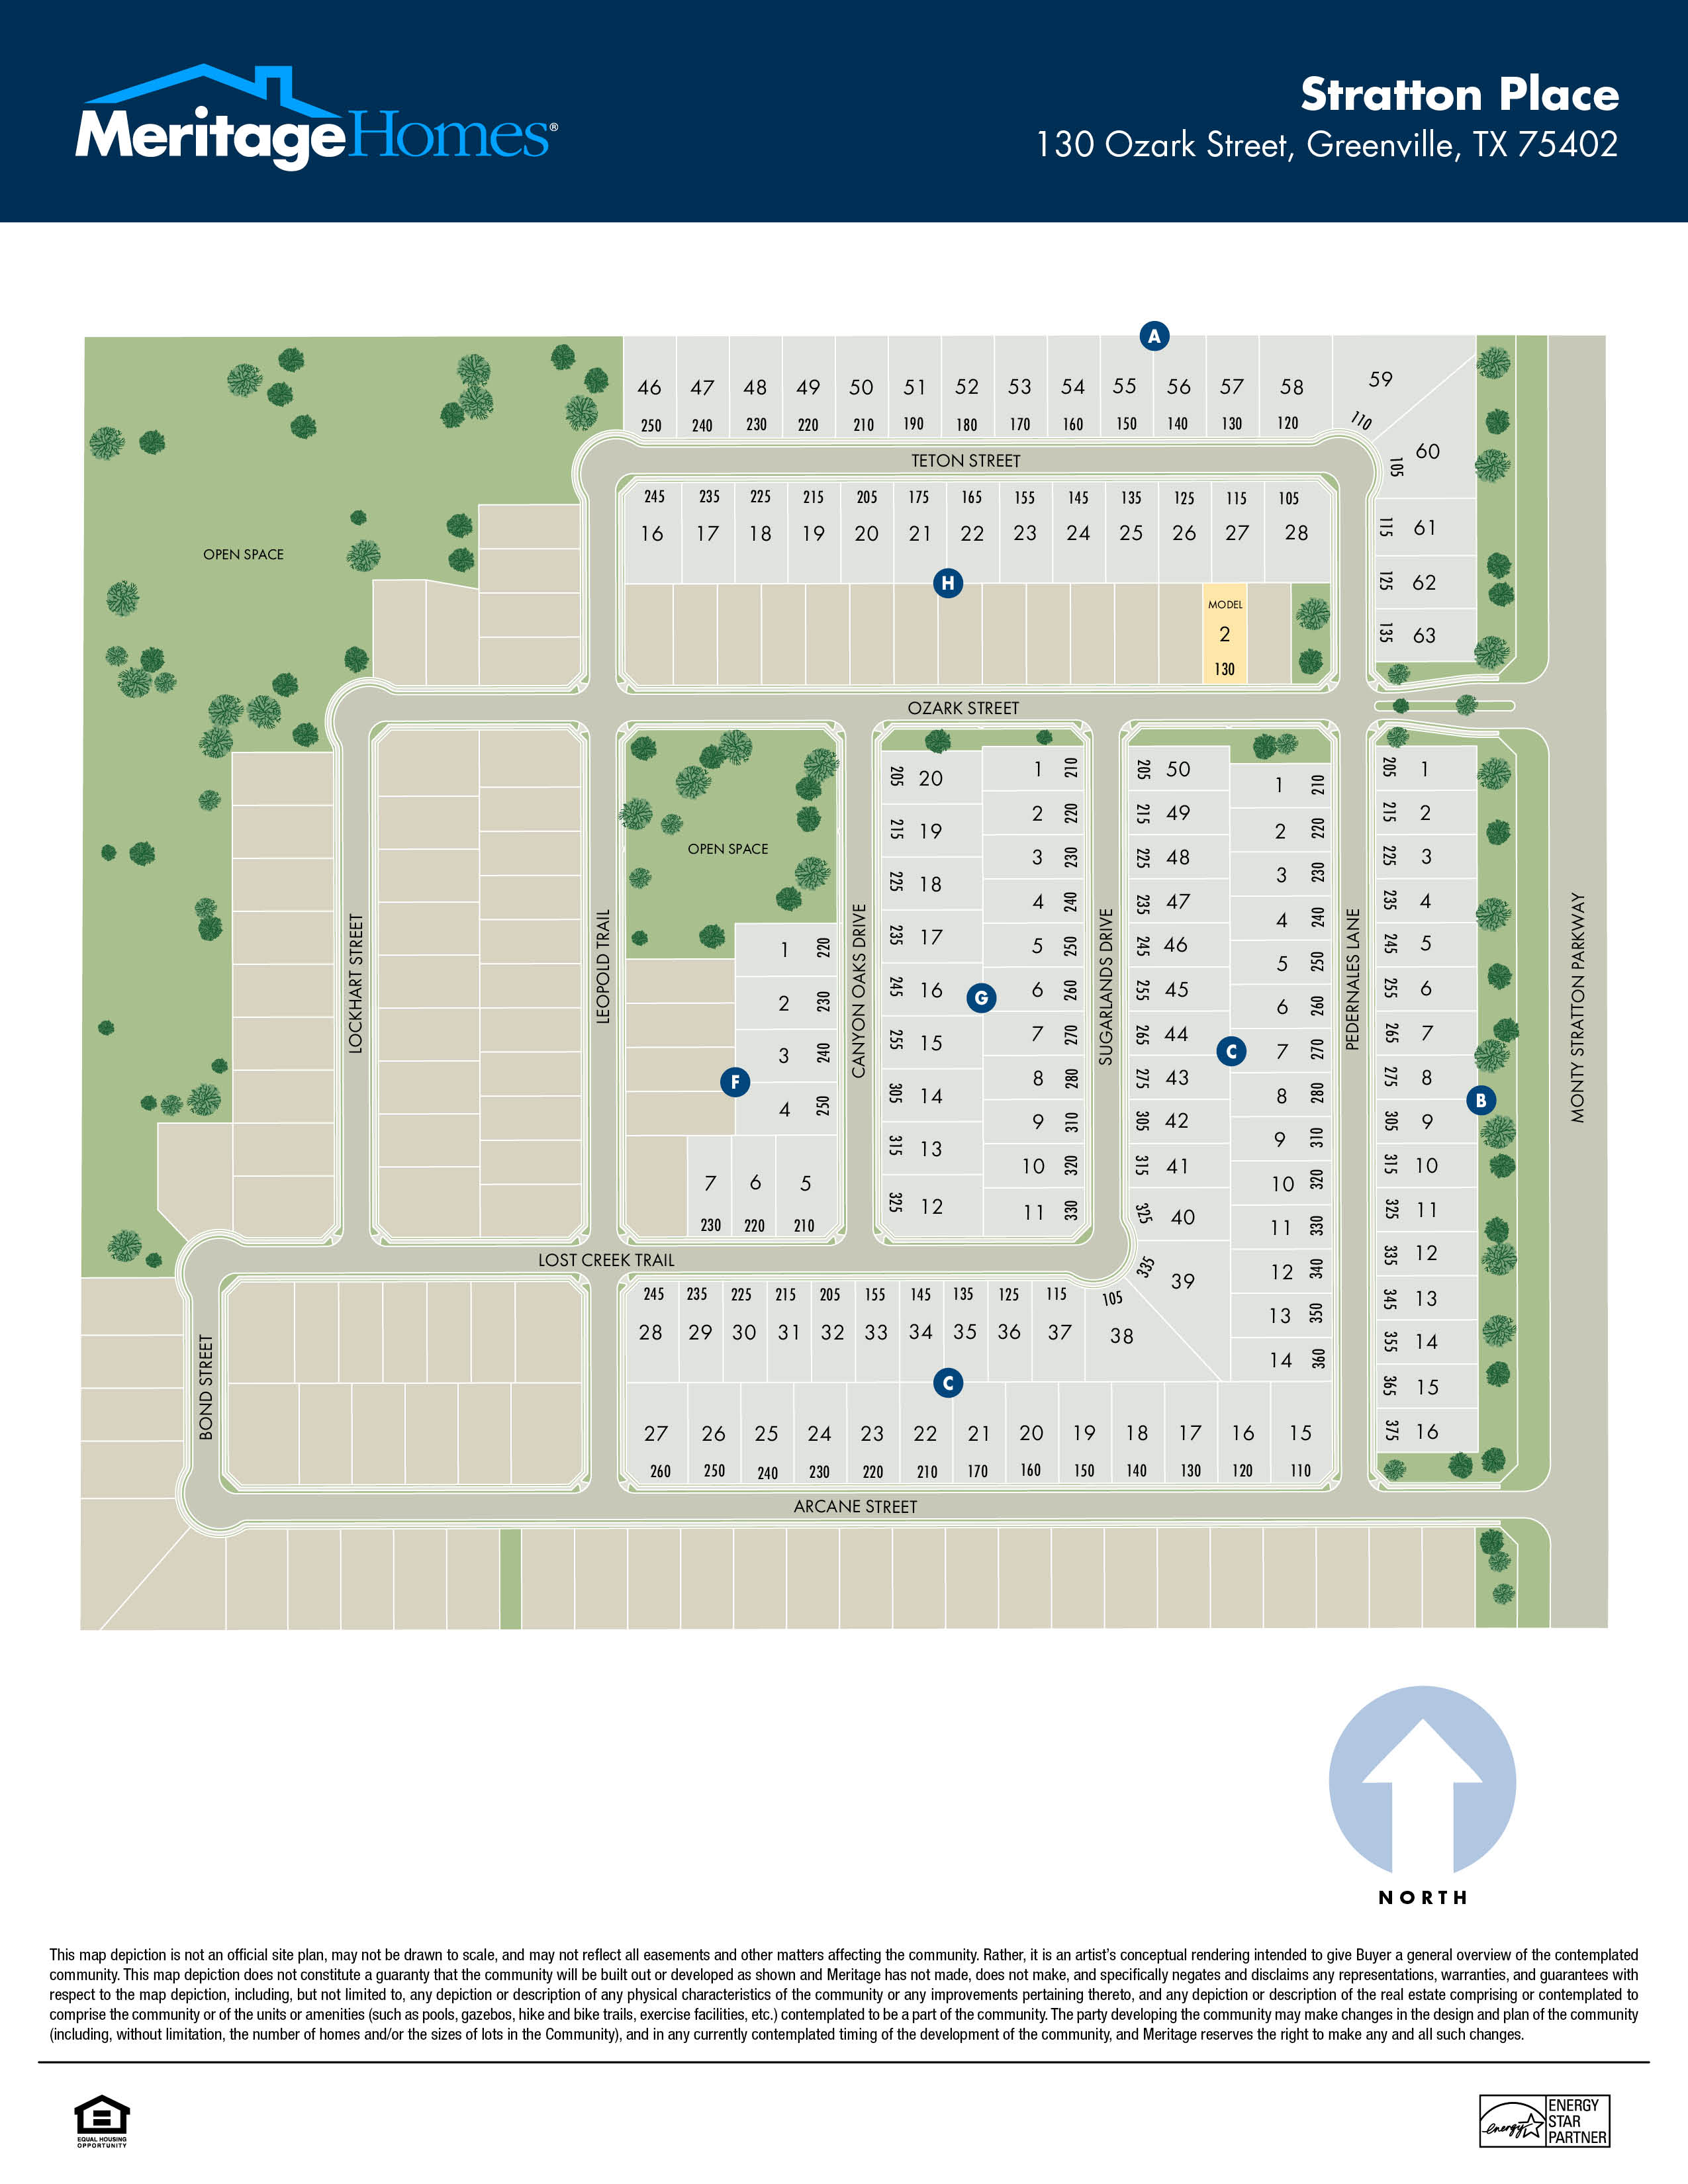 Stratton Place site map